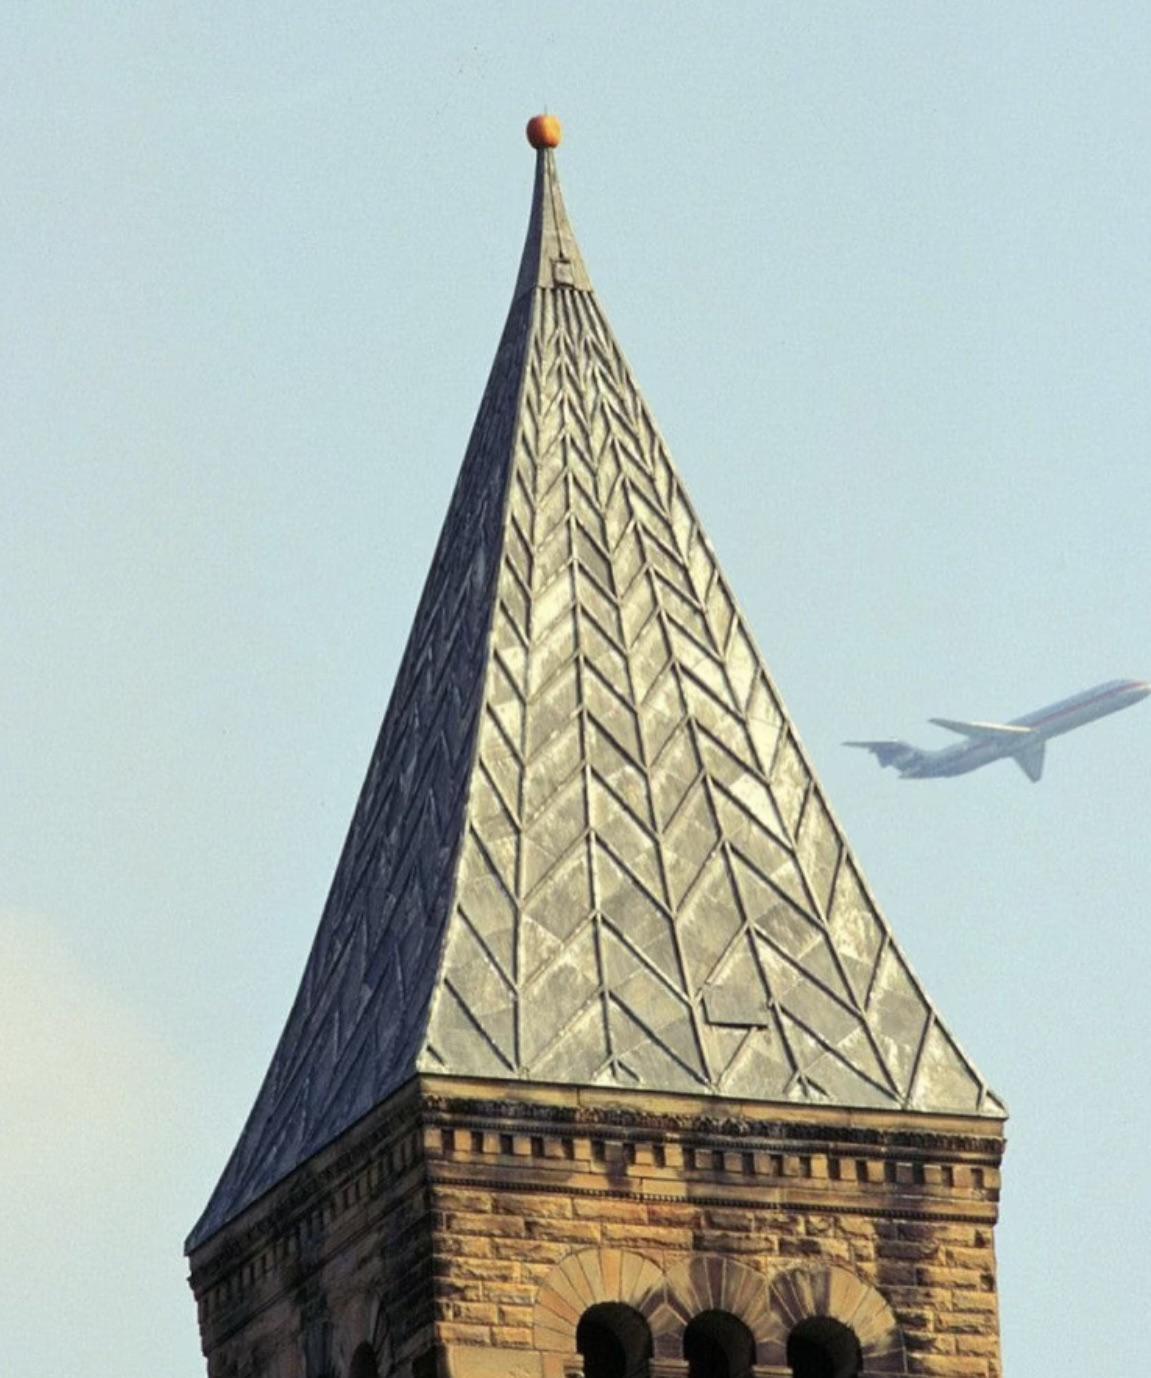 Pumpkin mysteriously impaled atop spire at Cornell University.jpg